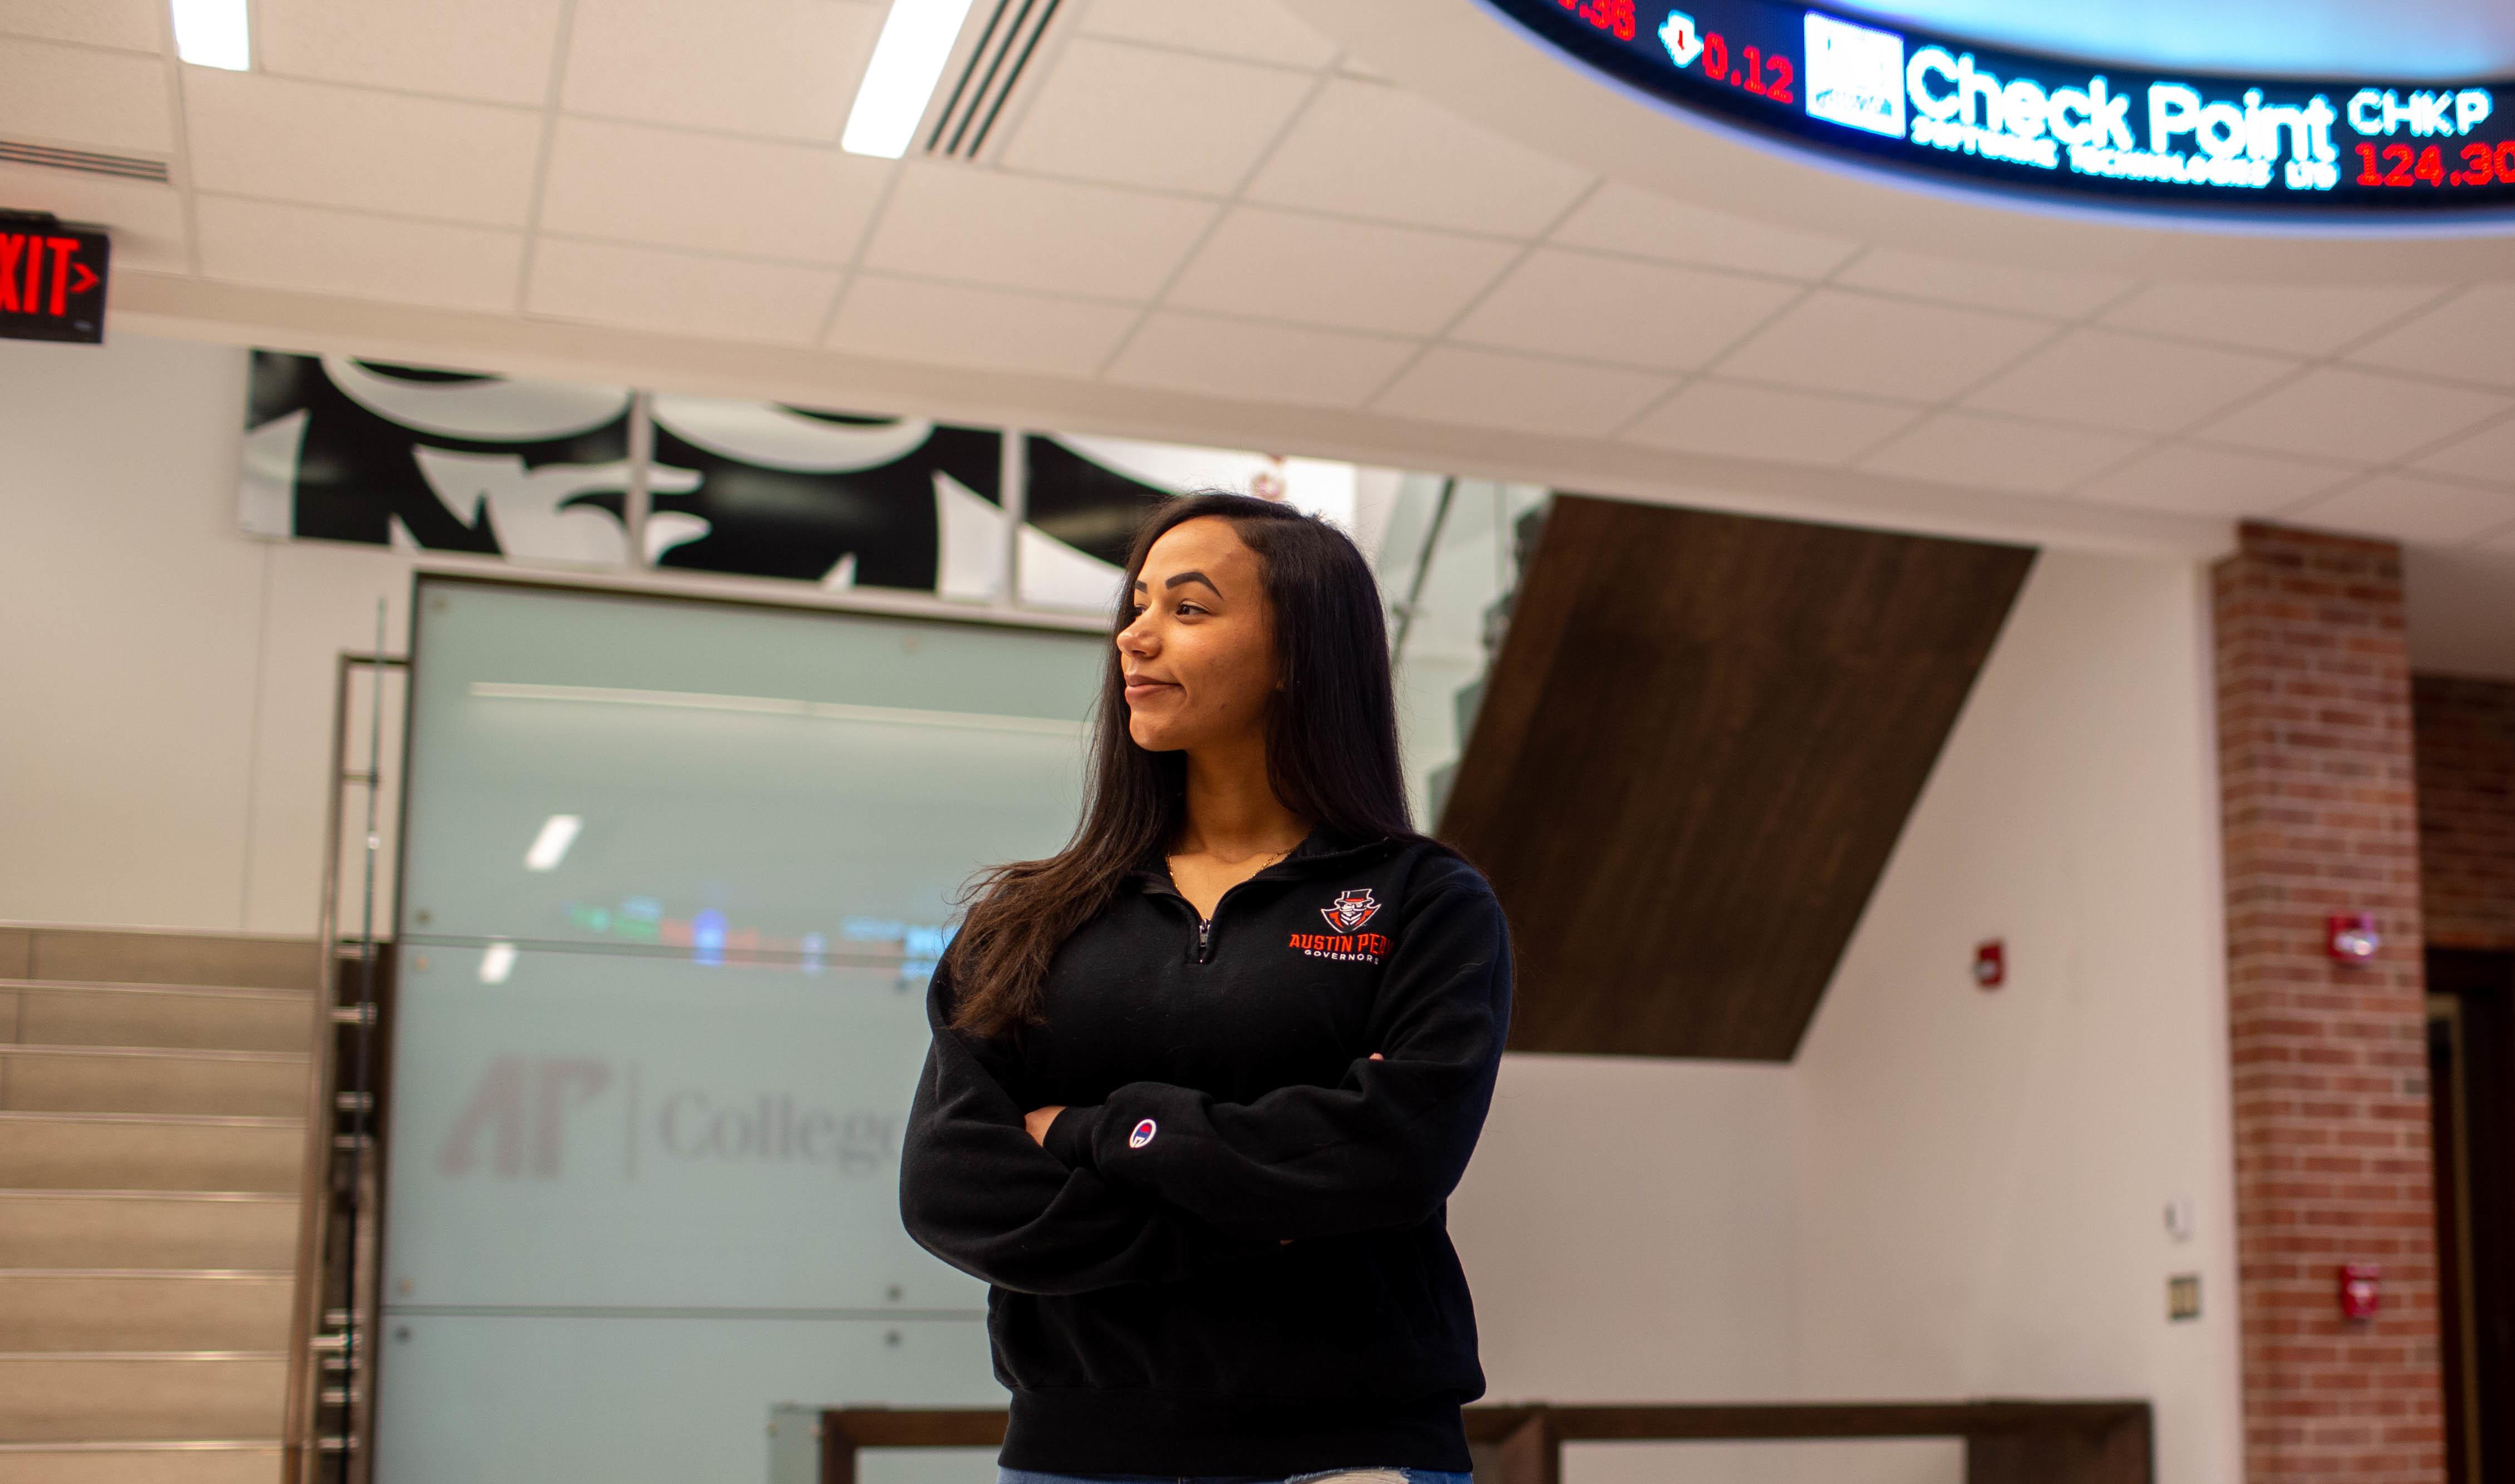 Austin Peay State University has been a part of Katherine Alba’s life for several years, including during her 2016 deployment to Iraq.  “When I was deployed, it was when I first started taking a few classes with the school,” she said during a recent interview. “It was an interesting time to do it online, but the school made it very easy for me to be able take classes remotely.”  Alba – who recently won the CSM (R) Sidney Brown Scholarship and will graduate in May with a degree in business management – was serving in Iraq in support of Operation Inherent Resolve.  “I’d go to work in the morning, do all that I would do, then at the end of the day, I’d go back to my room around 1800 (6 p.m.), and that’s when I would do my homework,” she said.  Developing as a leader  When Alba returned to Clarksville in December of that year, she immediately started APSU classes during “Winter Term,” a four-week online term between the fall and spring semesters. For the next few years, she continued juggling online classes at Austin Peay and her Army career.  That ended in 2019 when the Army accepted her into the Green to Gold program, a two-year program that provides eligible active-duty enlisted soldiers a chance to complete a bachelor’s or graduate degree and become commissioned as a U.S. Army officer.  Alba already has her eyes on the future.  “Both the ROTC program and the school I feel like they both have really developed me as a leader,” she said. “I feel very prepared to take on whatever I need to do next. Whenever my next duty position is going to be or wherever I go, I feel completely prepared that I'm going to be able to do well and excel wherever I go.”  Alba also hopes to use her degree to someday work in the field of human resources.  “I am passionate about helping others and making an organization the best it can possibly be,” she said.  Developing connections, lifelong friendships  Alba, originally from Reading, Pennsylvania, had several reasons for coming to Austin Peay.   “I chose to attend this University because of the amazing reputation the school and the APSU ROTC program has,” she said. “Before I started here, I constantly heard great things about the school from students, alumni and staff.”  The CSM (R) Sidney Brown Scholarship helps Alba in multiple ways. Not only does it help make her senior year feel more secure, but it also allows her to save her G.I. benefits for her children.  She also appreciates winning the scholarship because of her admiration for Brown – a Vietnam veteran who helped pave the way for a generation of elite African American soldiers. Brown deployed with the 101st Airborne Division in 1957 to Arkansas to help desegregate Little Rock Central High School .  He graduated in 1985 and went on to serve on the Montgomery County Commission. Brown died in 2020.  “It means a lot to me because he played such a big part in the community here and has such a big part in history itself,” Alba said. “I just really want his family to know that the foundation and the scholarship is really making a difference for me in my life and for my family.”  As an undergraduate, Alba has been an accomplished cadet within the ROTC program and a member of the APSU Chapter of the National Society of Leadership and Success.  “During my time at APSU, I have made connections with so many wonderful people,” she said. “I have made lifelong friendships and also met many mentors who I regularly seek guidance from. These people have all made my experience here one to remember.”   To learn more  • For more about Austin Peay’s ROTC program, visit https://www.apsu.edu/rotc/.  • For more about the Green To Gold program at APSU, go to https://www.apsu.edu/rotc/active-duty-soldiers-green-to-gold.php. • To read more about Sidney Brown’s life, visit this news obituary from The Leaf-Chronicle: https://www.theleafchronicle.com/story/news/local/clarksville/2020/01/06/sidney-brown-trailblazing-black-airborne-soldier-dies/2822983001/.  How to give  This story features a student who has benefited from an APSU endowment. Endowments are permanently restricted funds managed by the Austin Peay State University Foundation. The amount of each scholarship award may vary and will be determined based upon the value of the endowment and the Foundation spending plan. To support APSU fundraising initiatives, contact the Office of University Advancement at 931-221-7127.